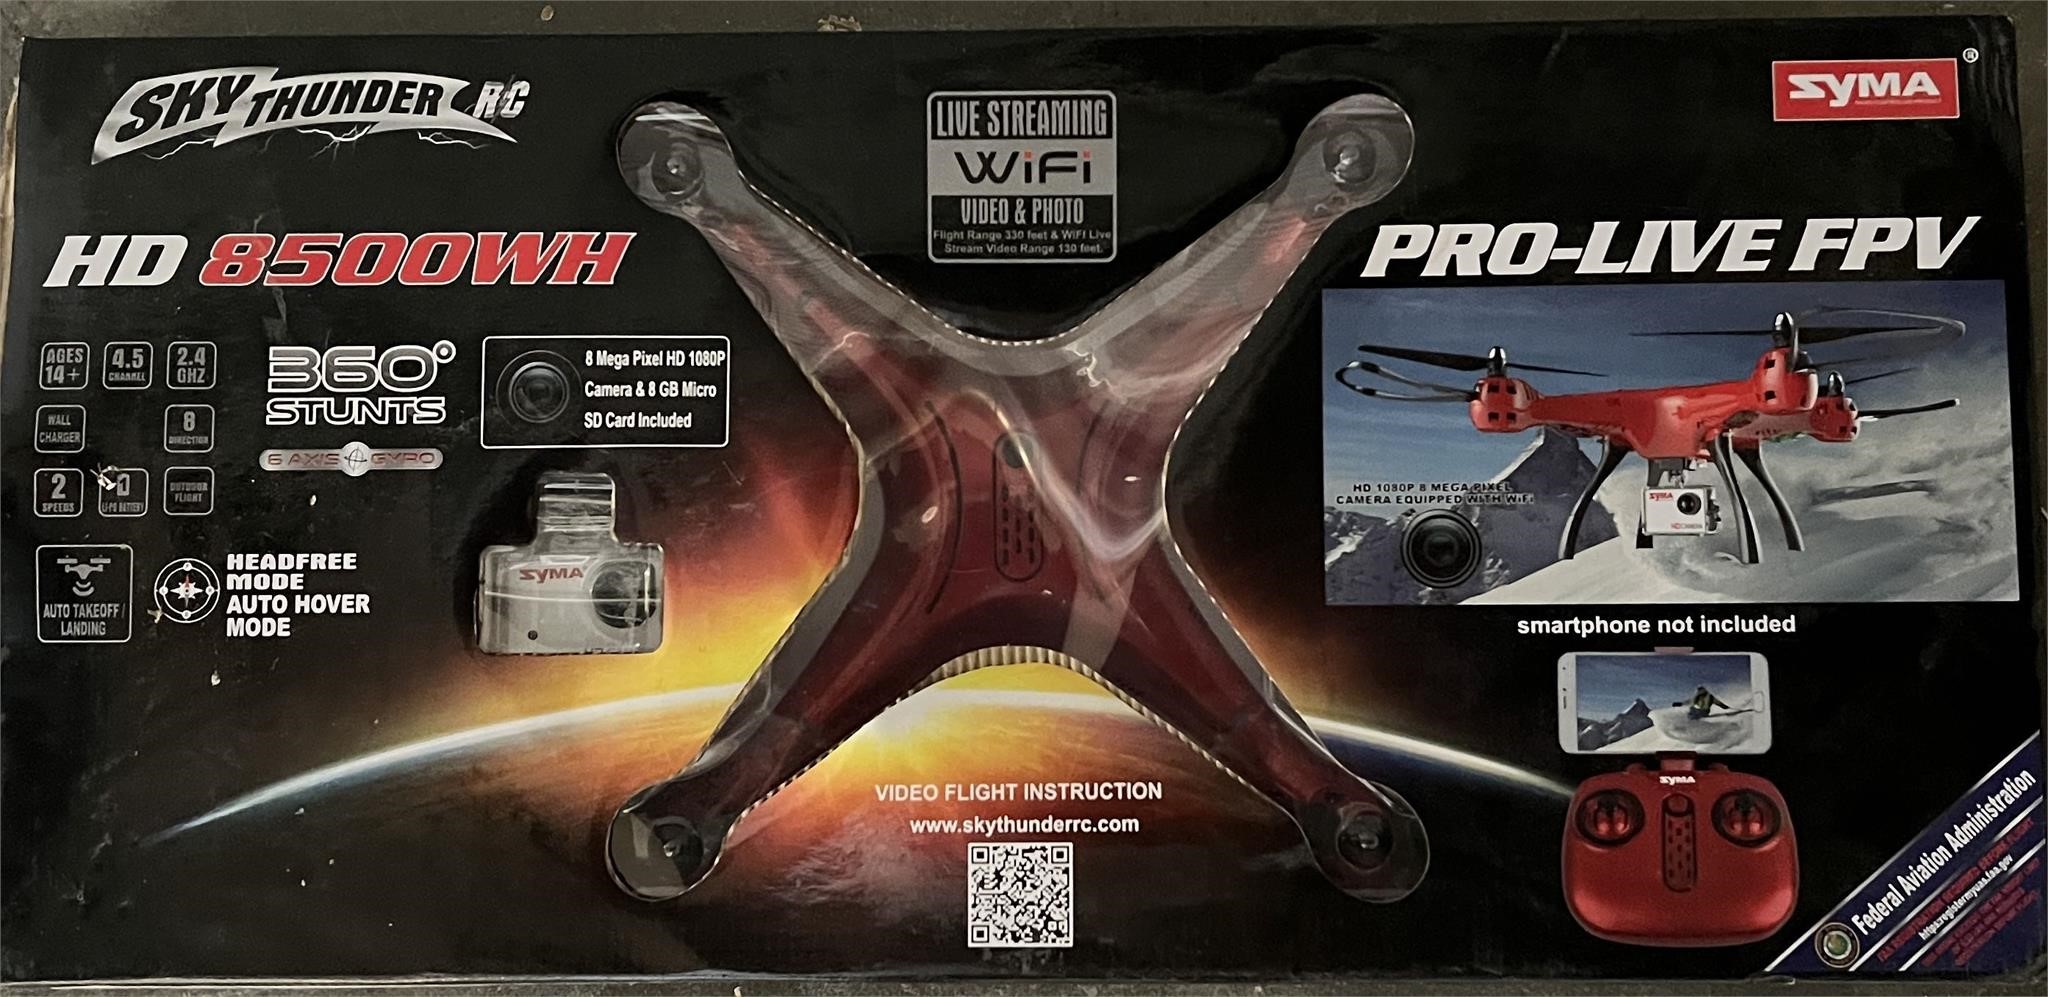 Sky Thunder HD8500WH remote controlled drone with